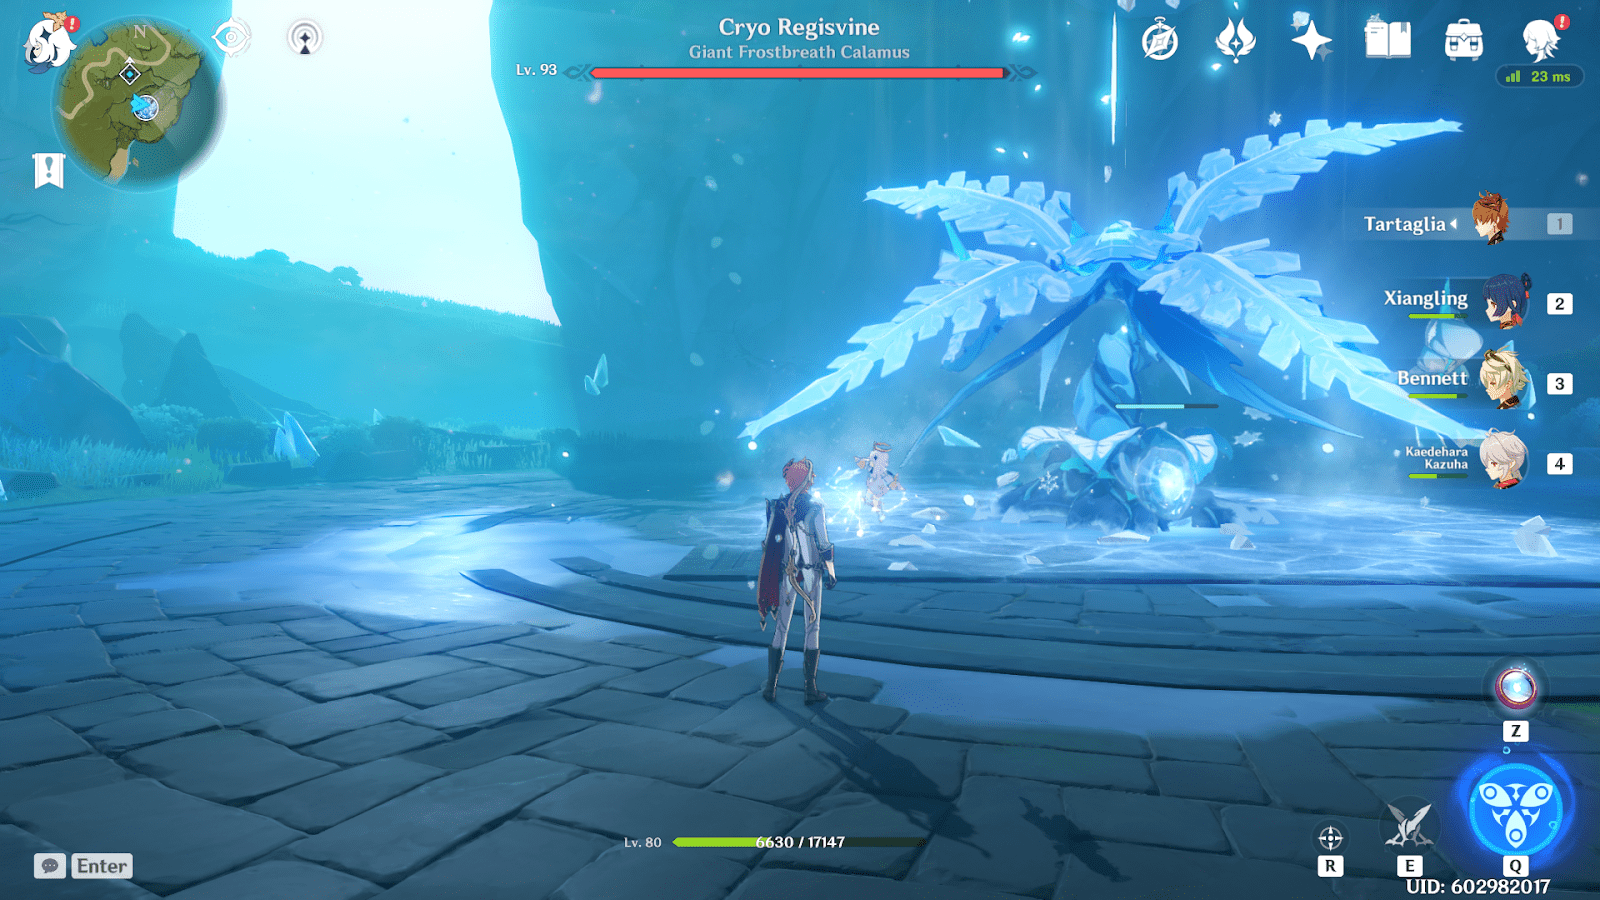 Showing passive range of a Childe equipped with Slingshot (outside the circlet of Cryo Regisvine area)